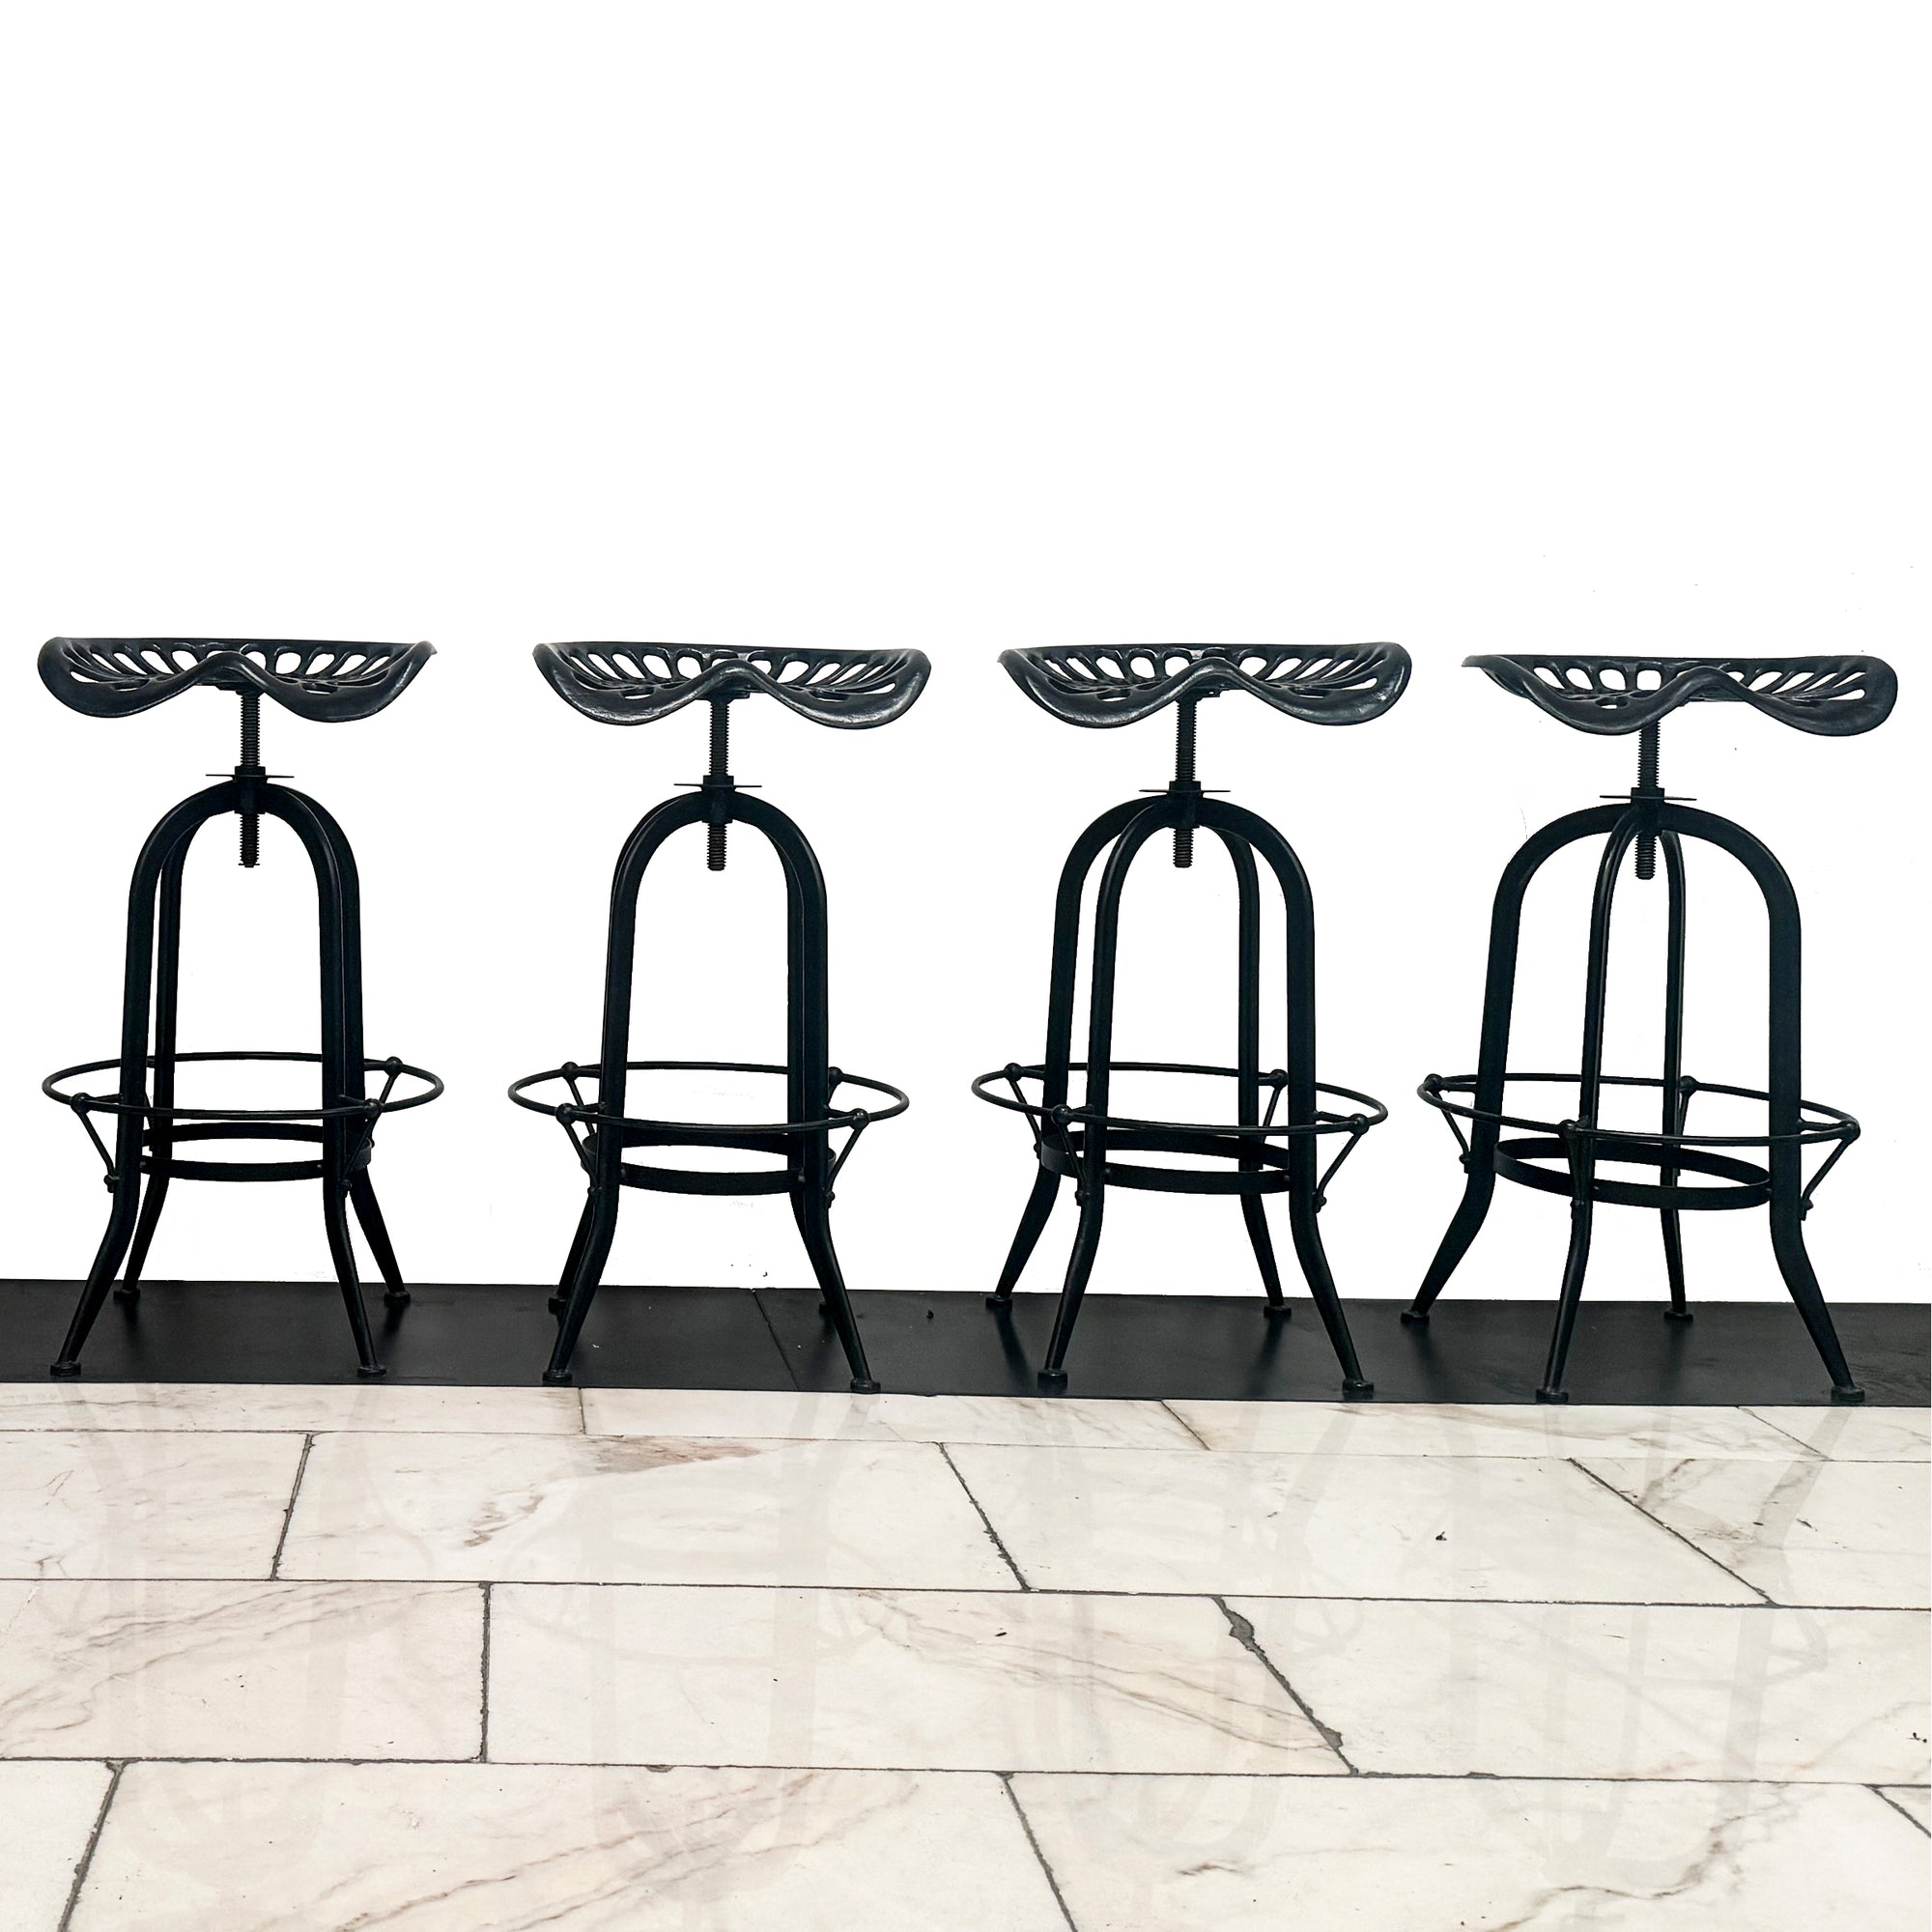 Reclaimed Cast Iron Tractor Seat Adjustable Stools (11 available) | The Architectural Forum